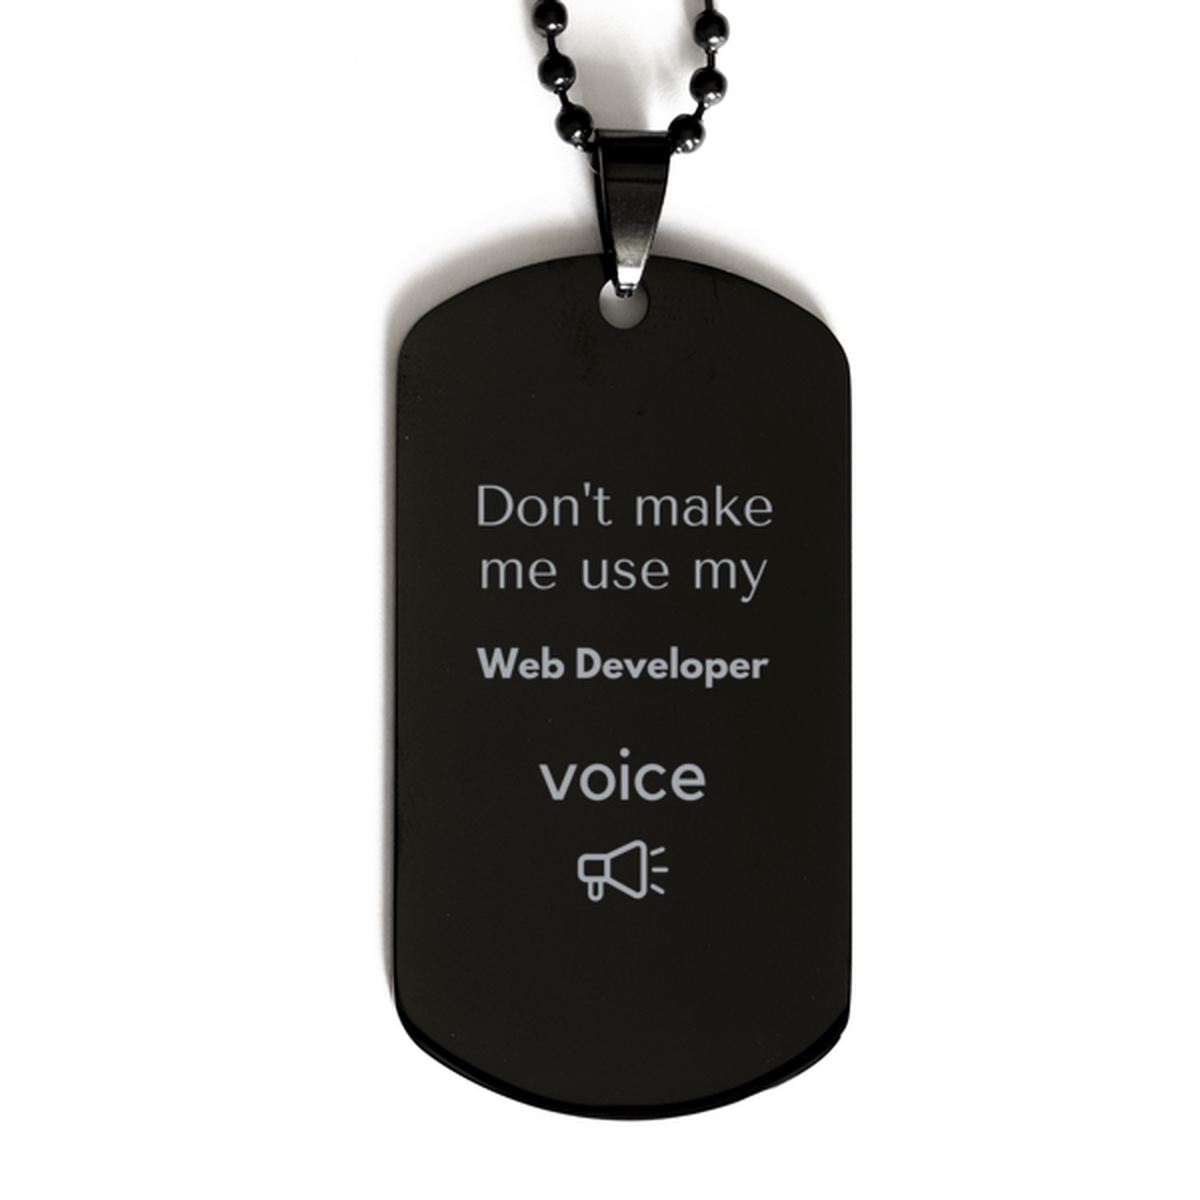 Don't make me use my Web Developer voice, Sarcasm Web Developer Gifts, Christmas Web Developer Black Dog Tag Birthday Unique Gifts For Web Developer Coworkers, Men, Women, Colleague, Friends